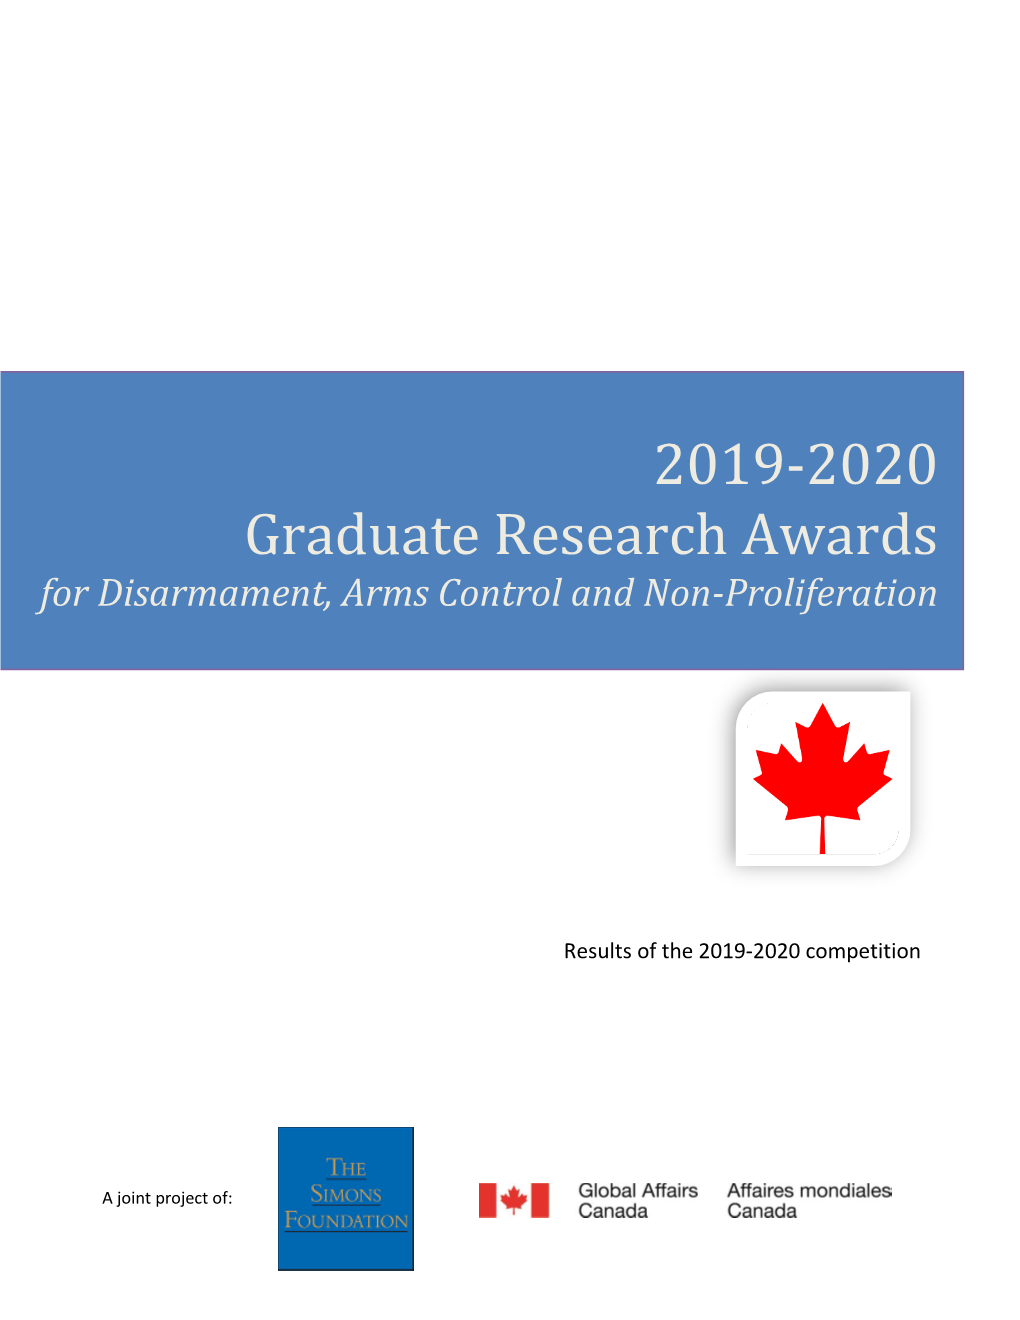 2019-2020 Graduate Research Awards for Disarmament, Arms Control and Non-Proliferation